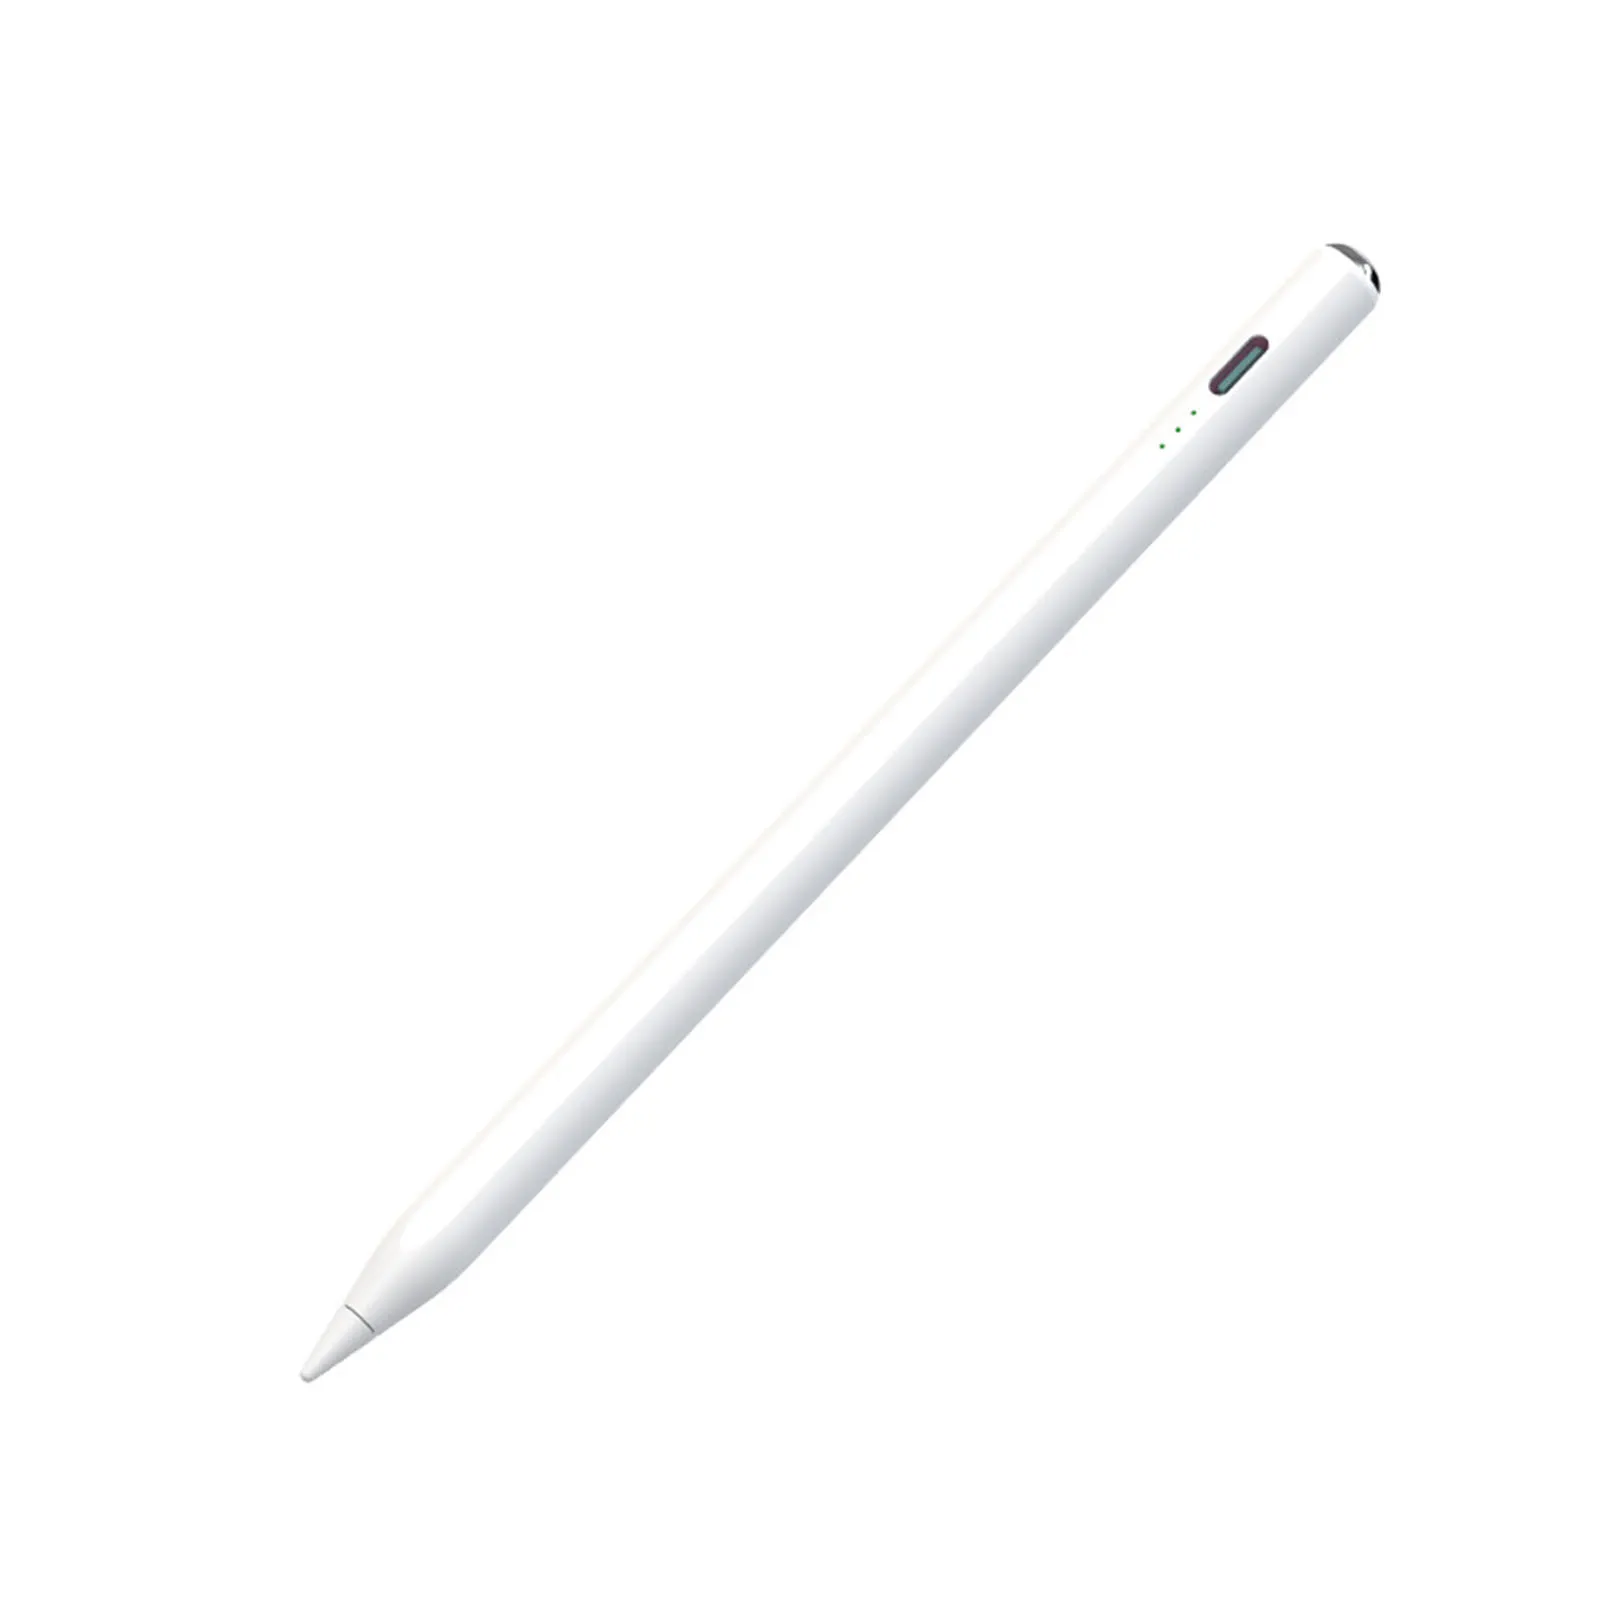 

Pens For Touch Screens High Precision Capacitive Stylus Two-In-One Multi-Function Stylus For Drawing Handwriting Gaming